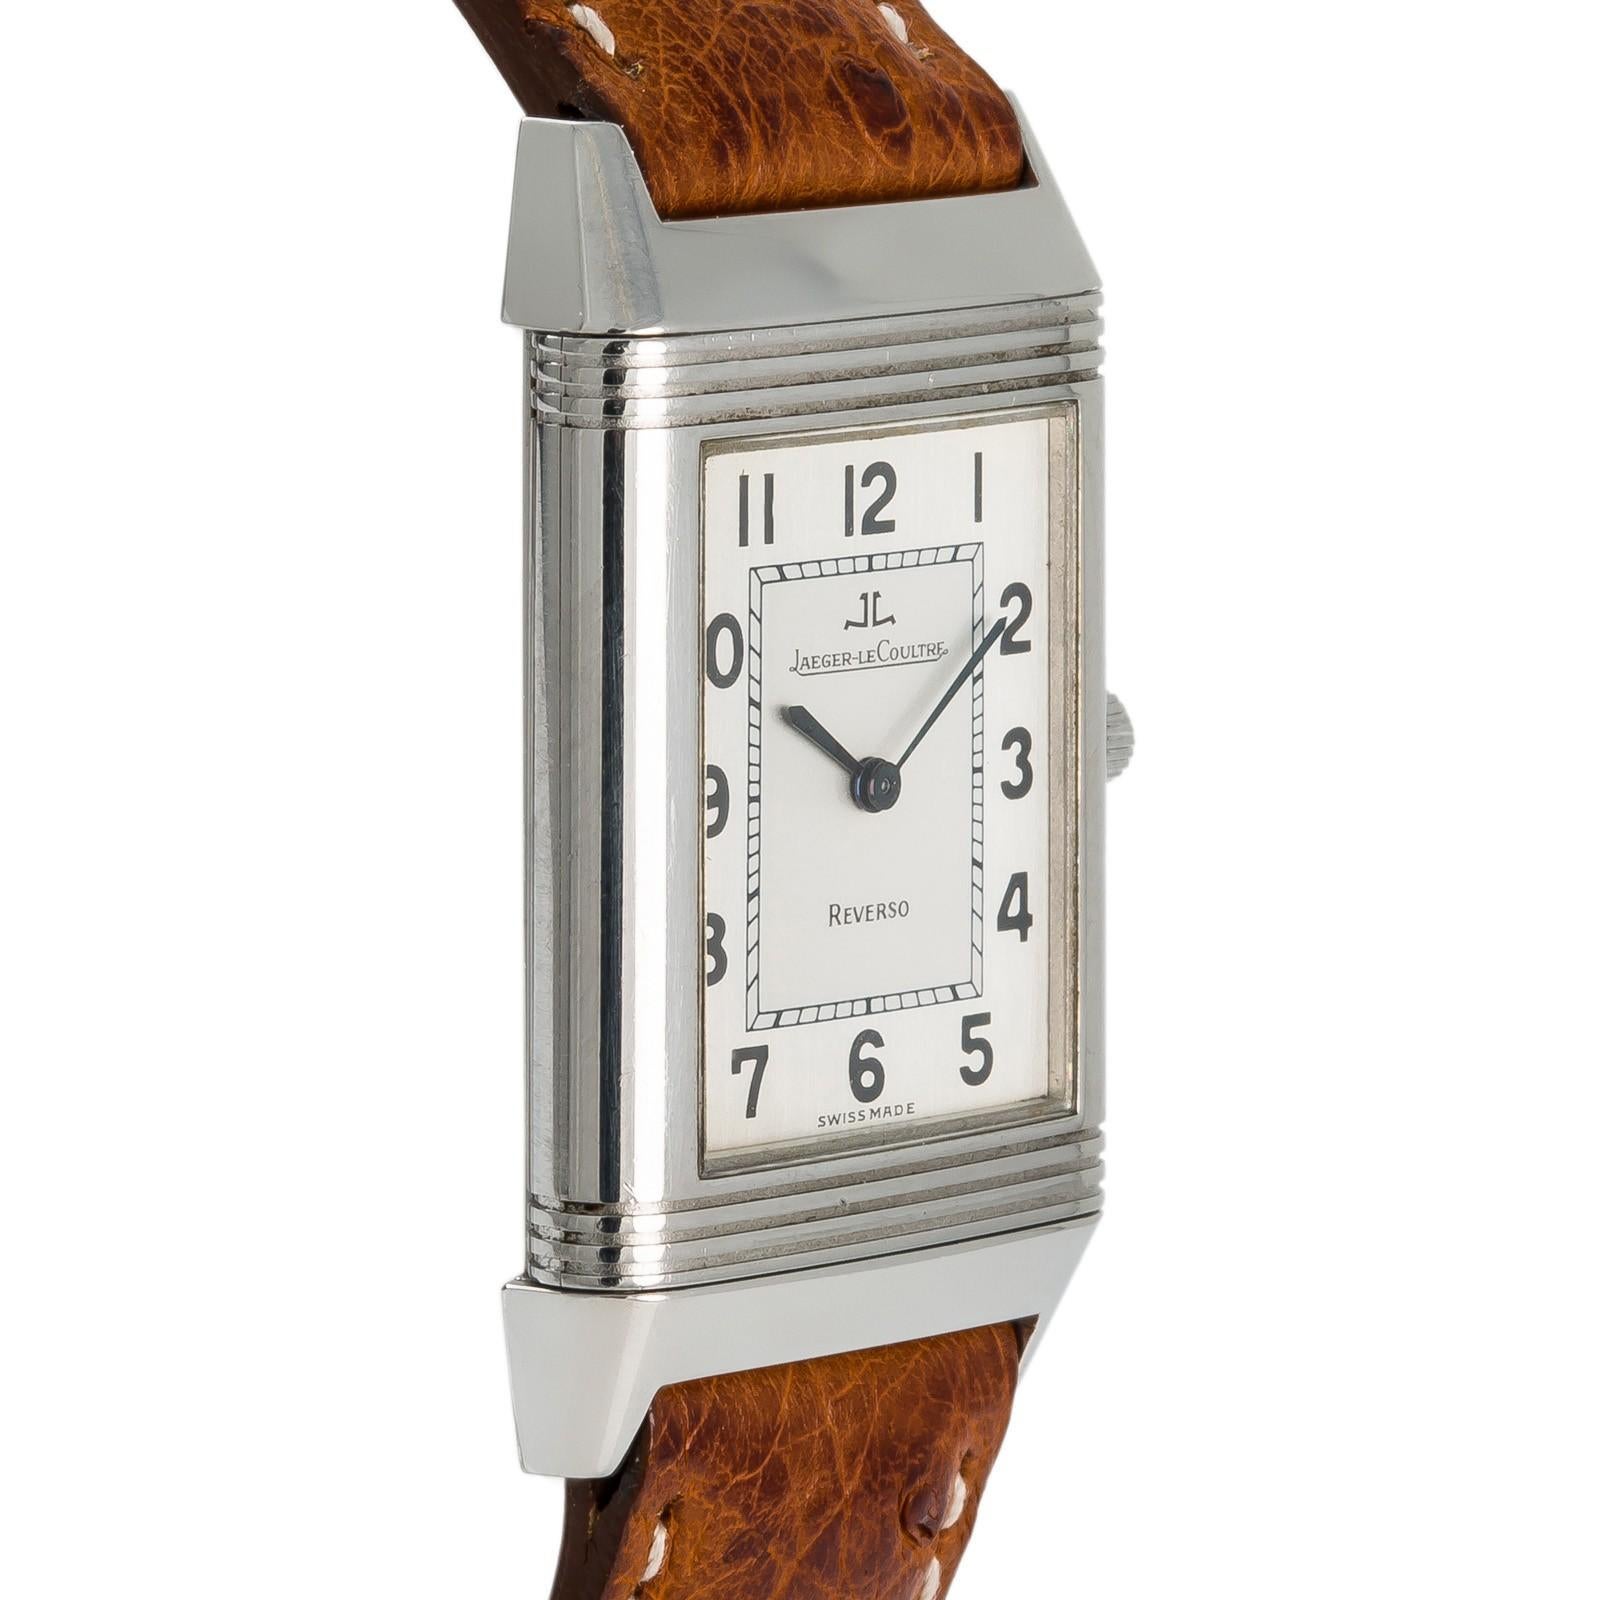 Jaeger LeCoultre Reverso 250.8.86, Certified Authentic 1